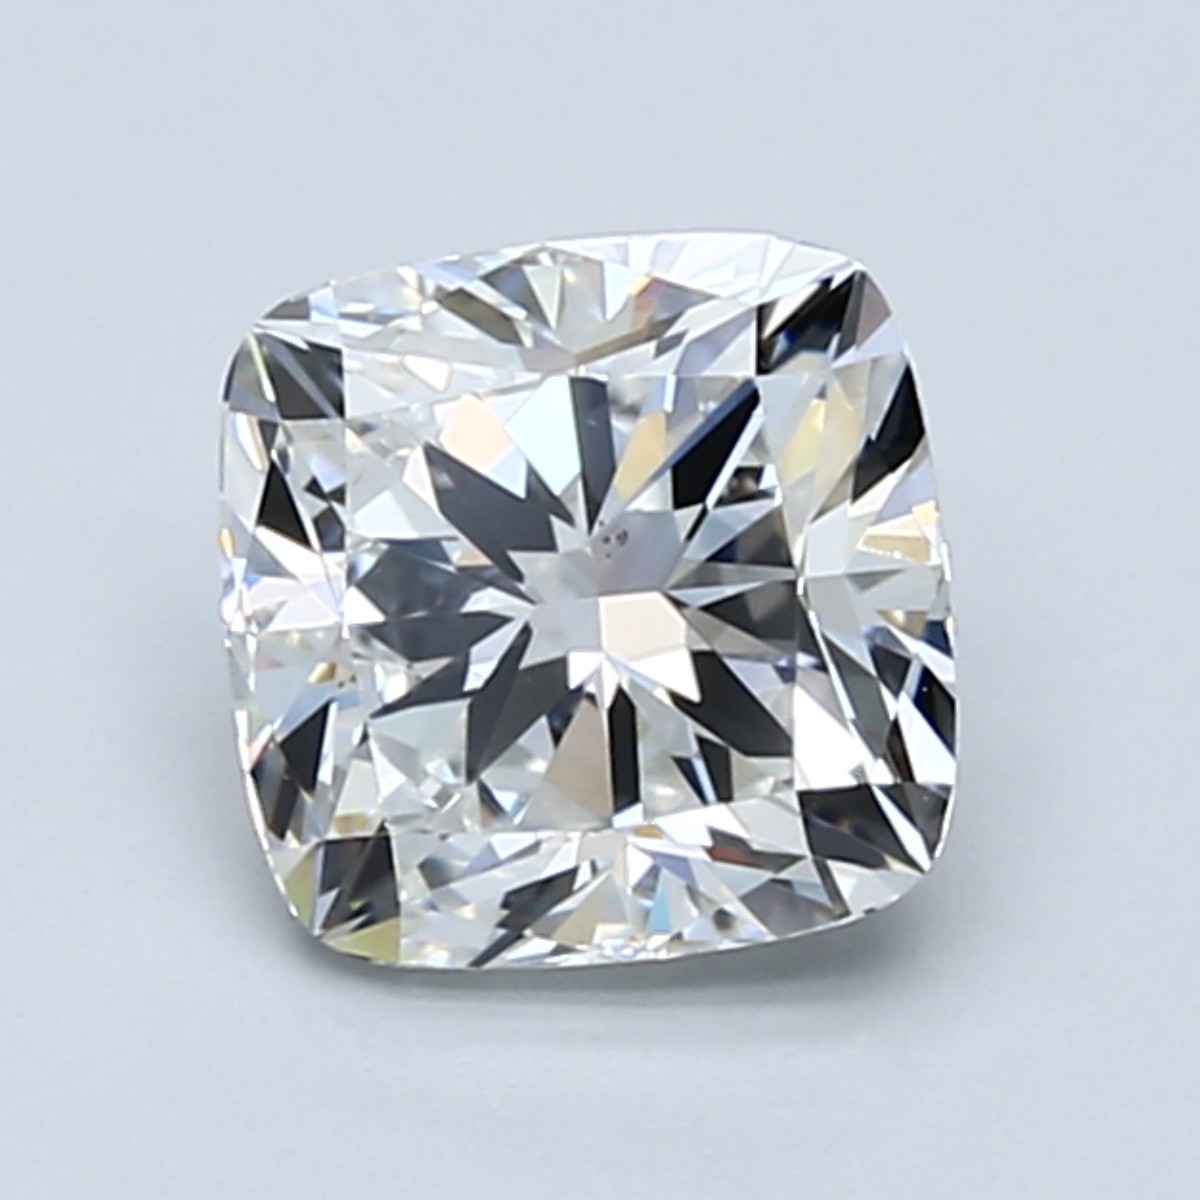 Cushion 1.51 Carat G Color VS2 Clarity For Sale